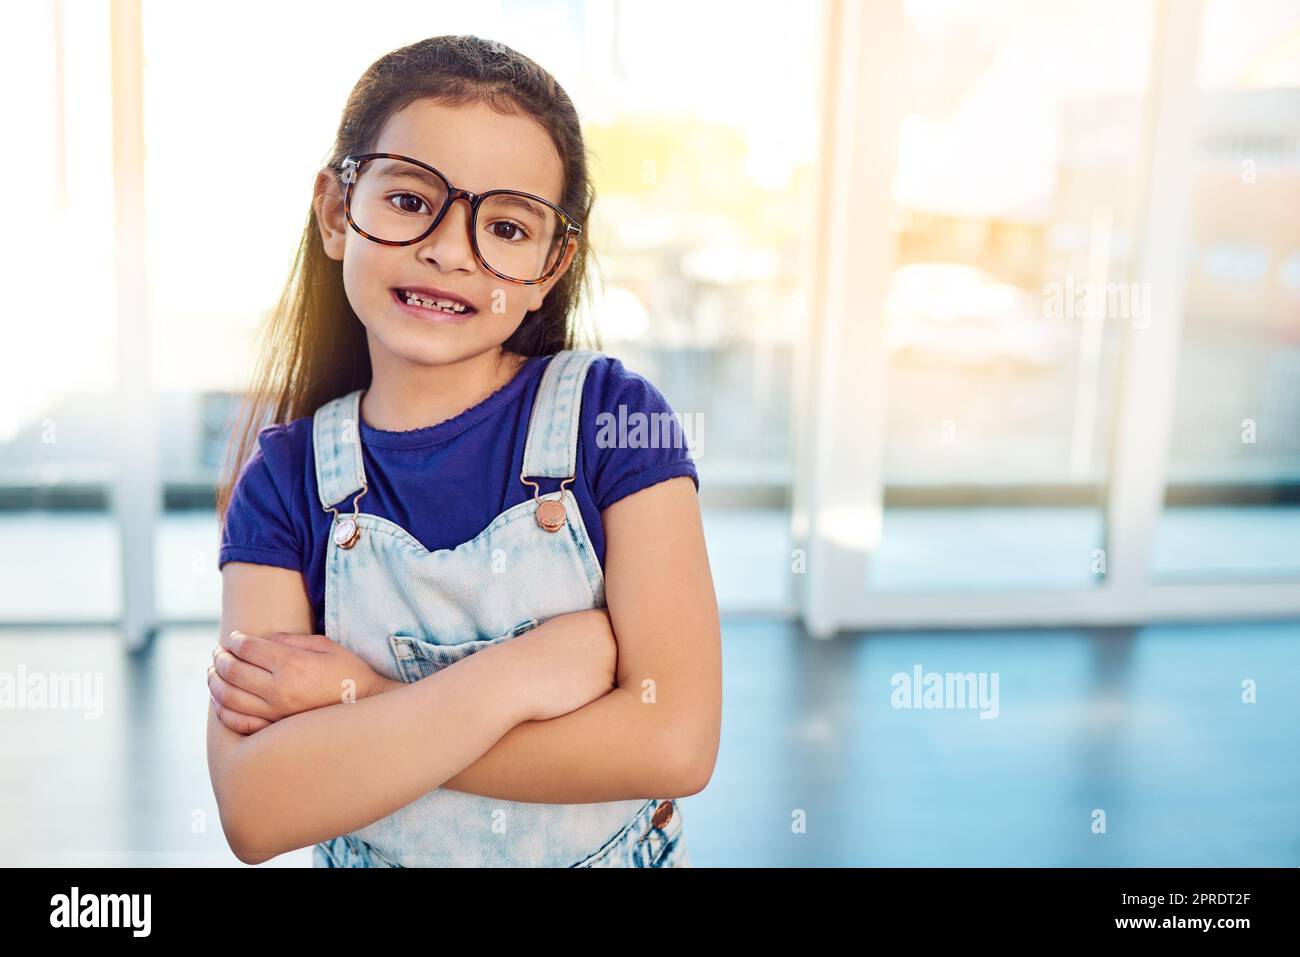 Smart girls run the world. Portrait of an adorable little girl with glasses on posing with her arms folded at home. Stock Photo